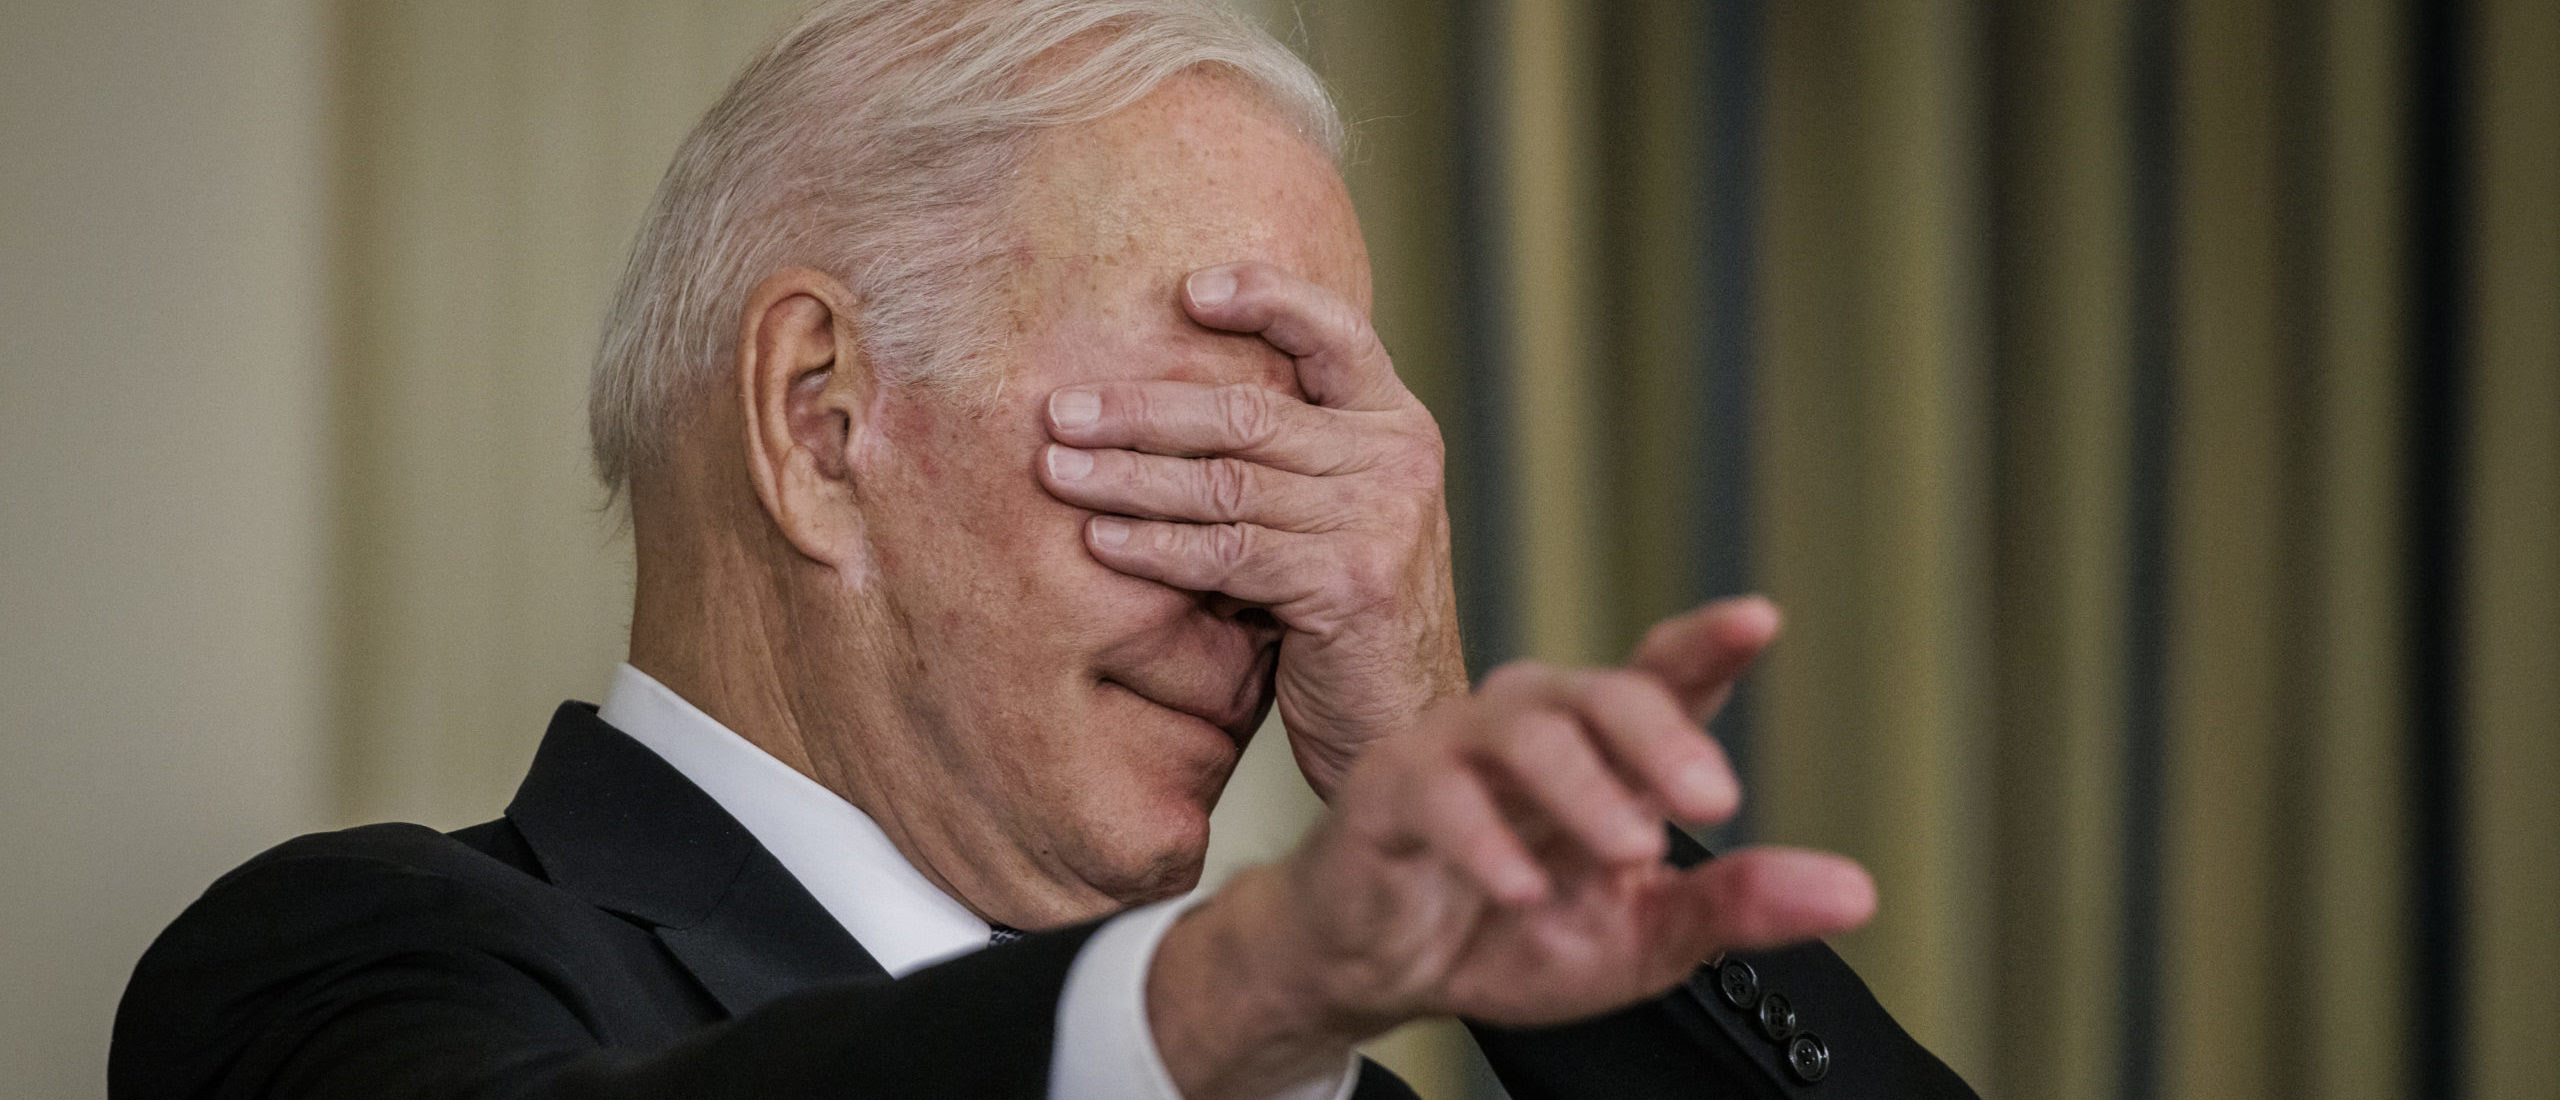 Some Economists Say Biden’s Plan To Fight Inflation Will Likely Just Make It Worse